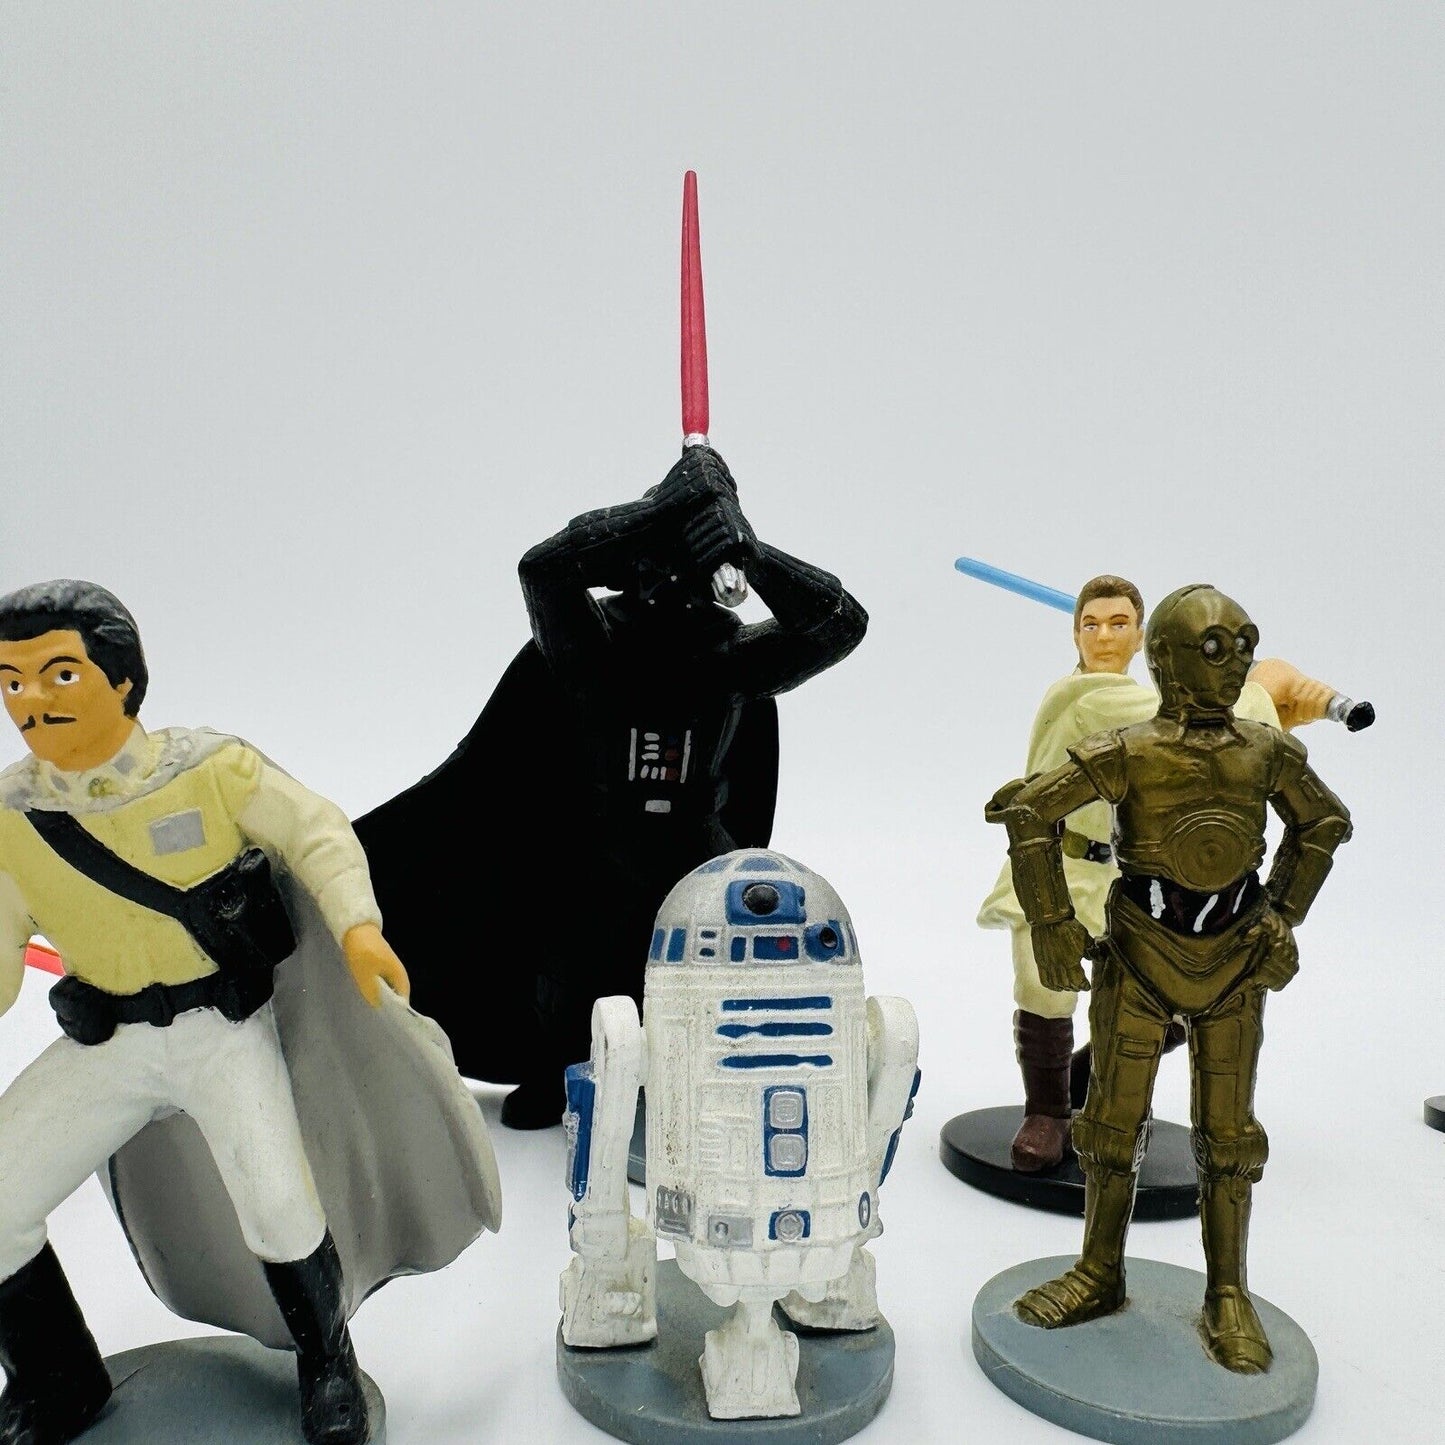 Vintage Applause Star Wars Figurines with Stand 1999 Lot 22 Pieces